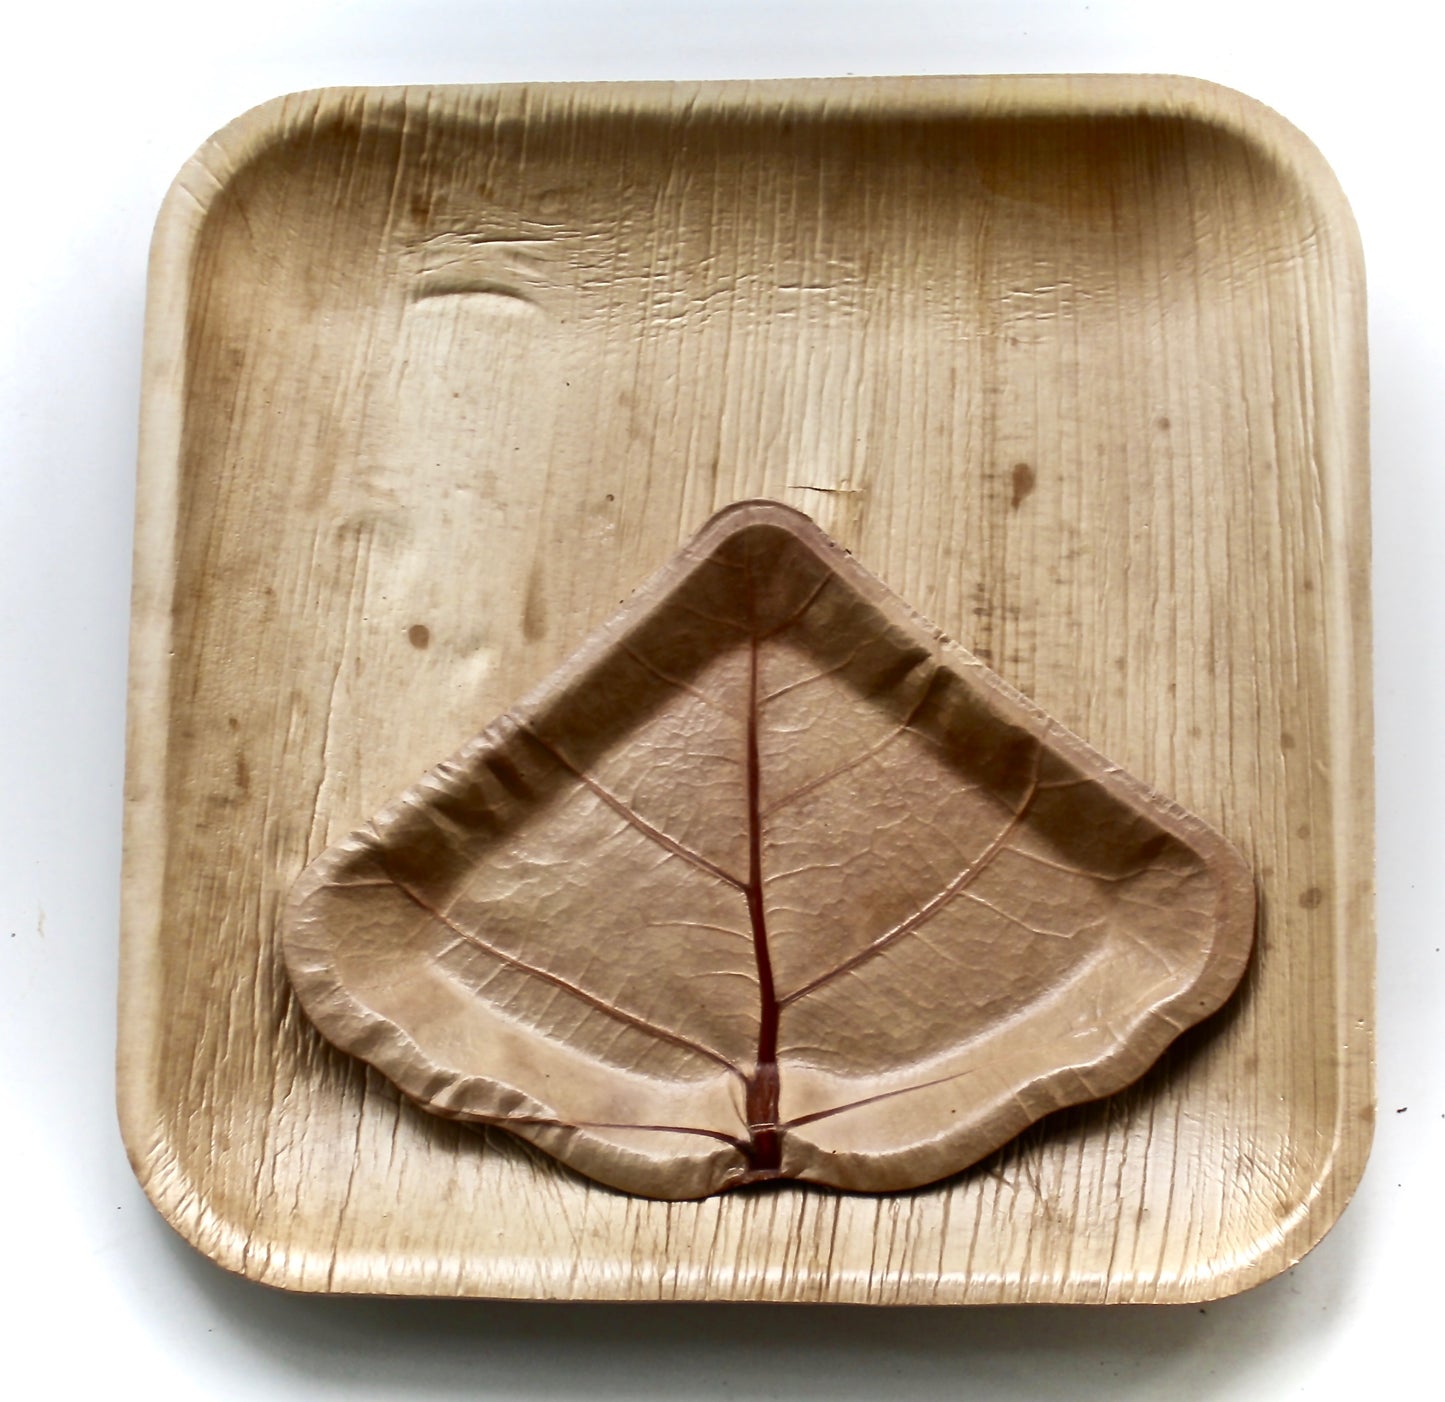 Bamboo Type palm leaf plate 20 pic Square 10" - Seagrape 20 pice Natural Leaf 7" - 30 Utensils Biodegradable